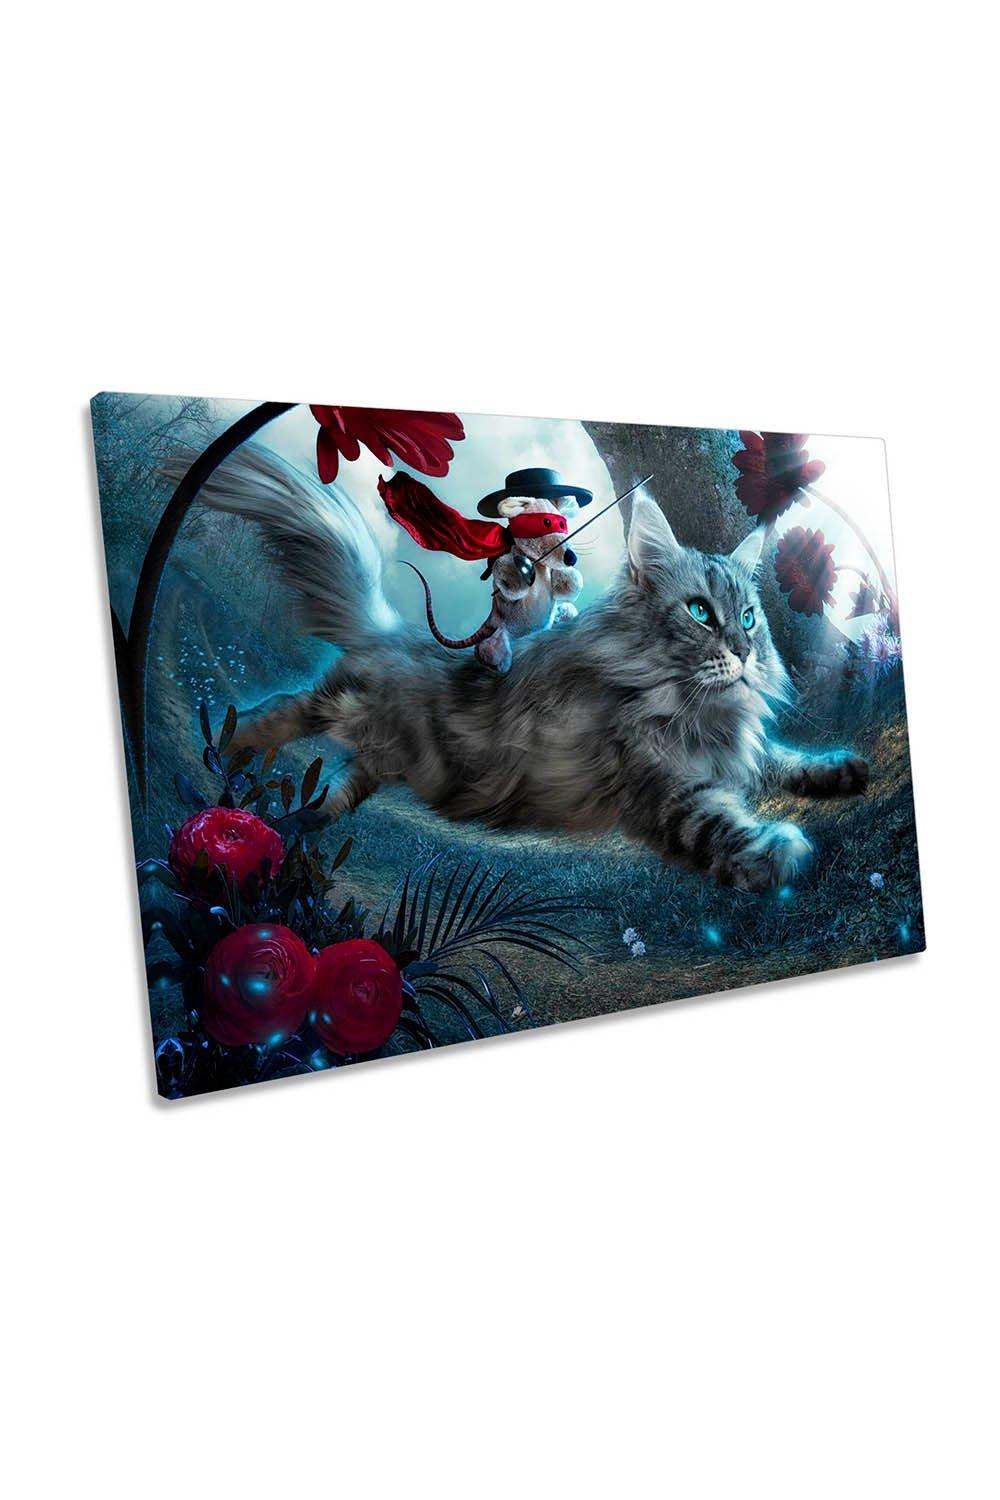 The Hero Mouse Cat Wonderland Canvas Wall Art Picture Print